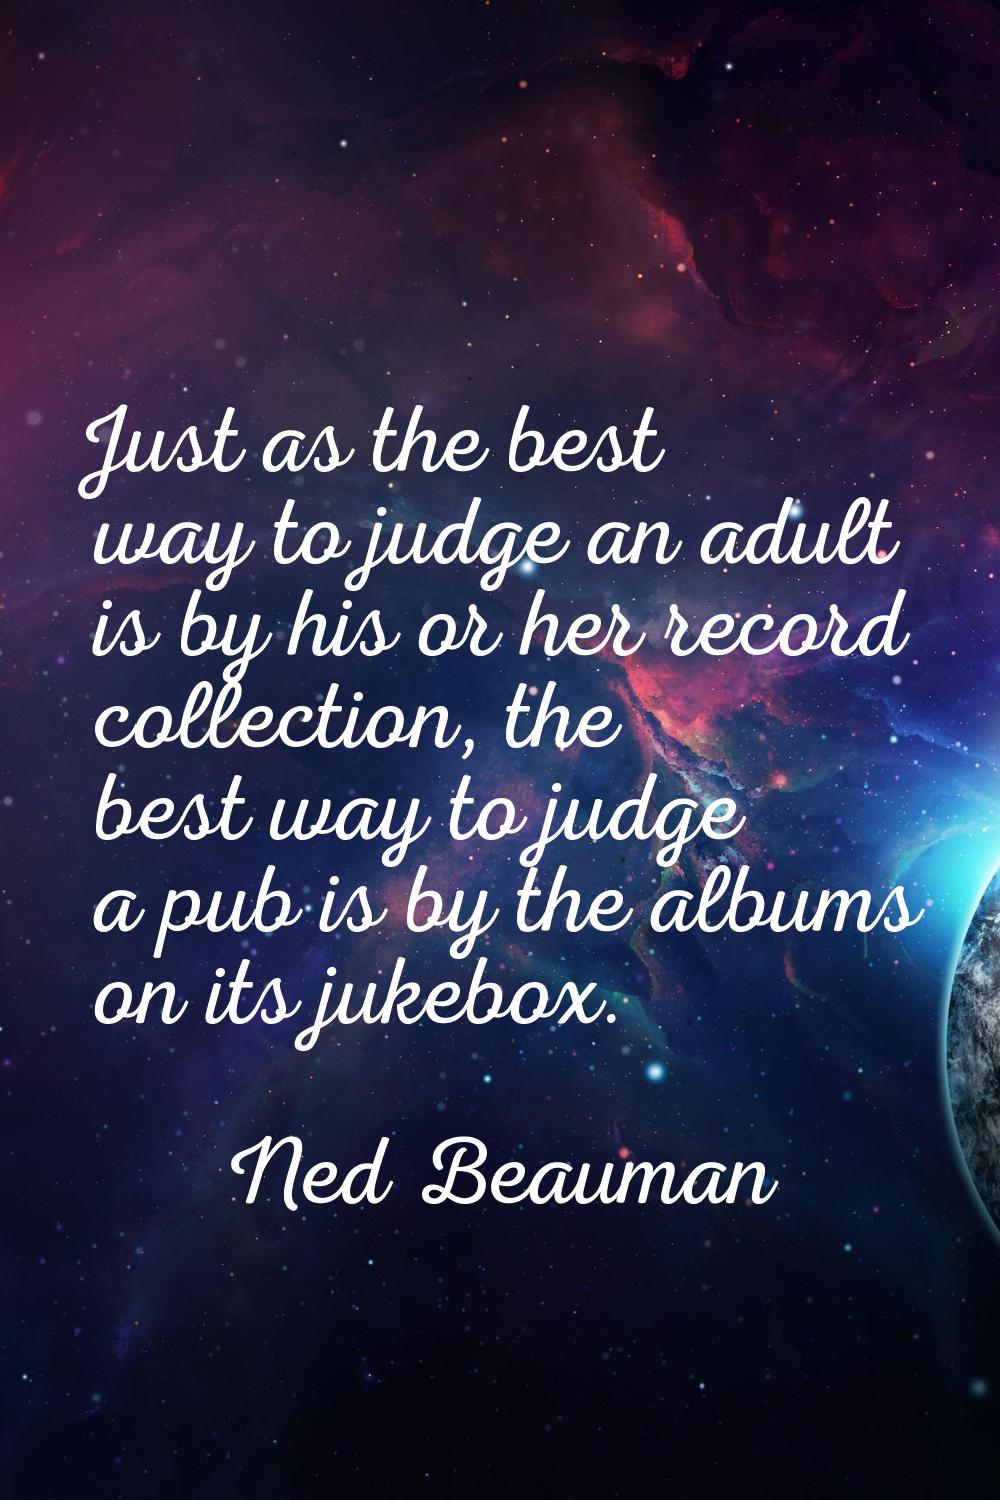 Just as the best way to judge an adult is by his or her record collection, the best way to judge a 